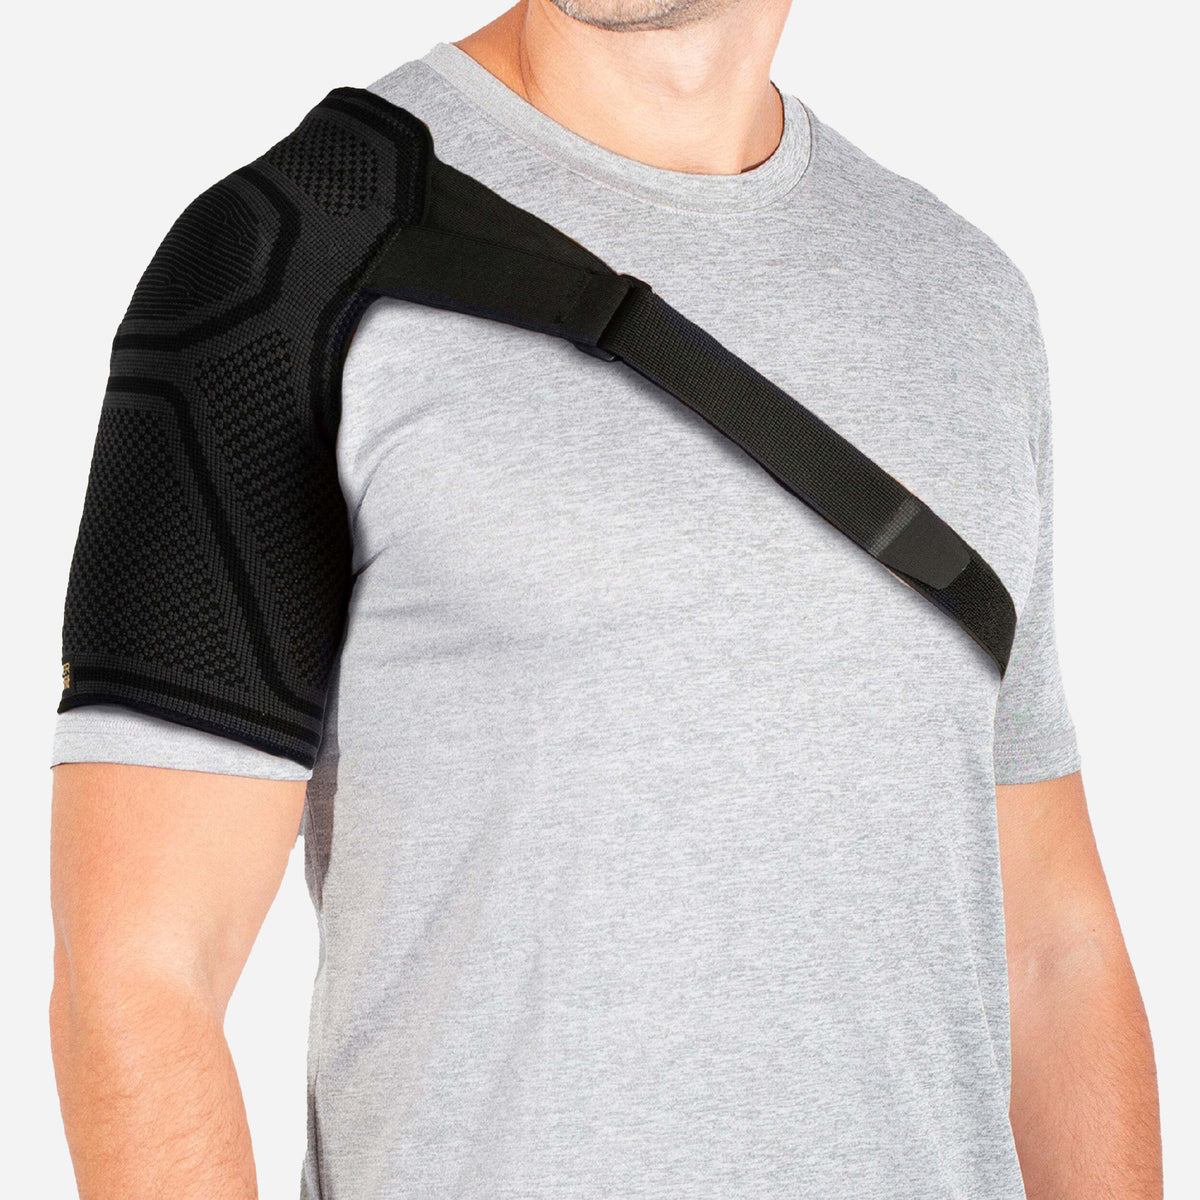  Copper Compression Recovery Shoulder Brace